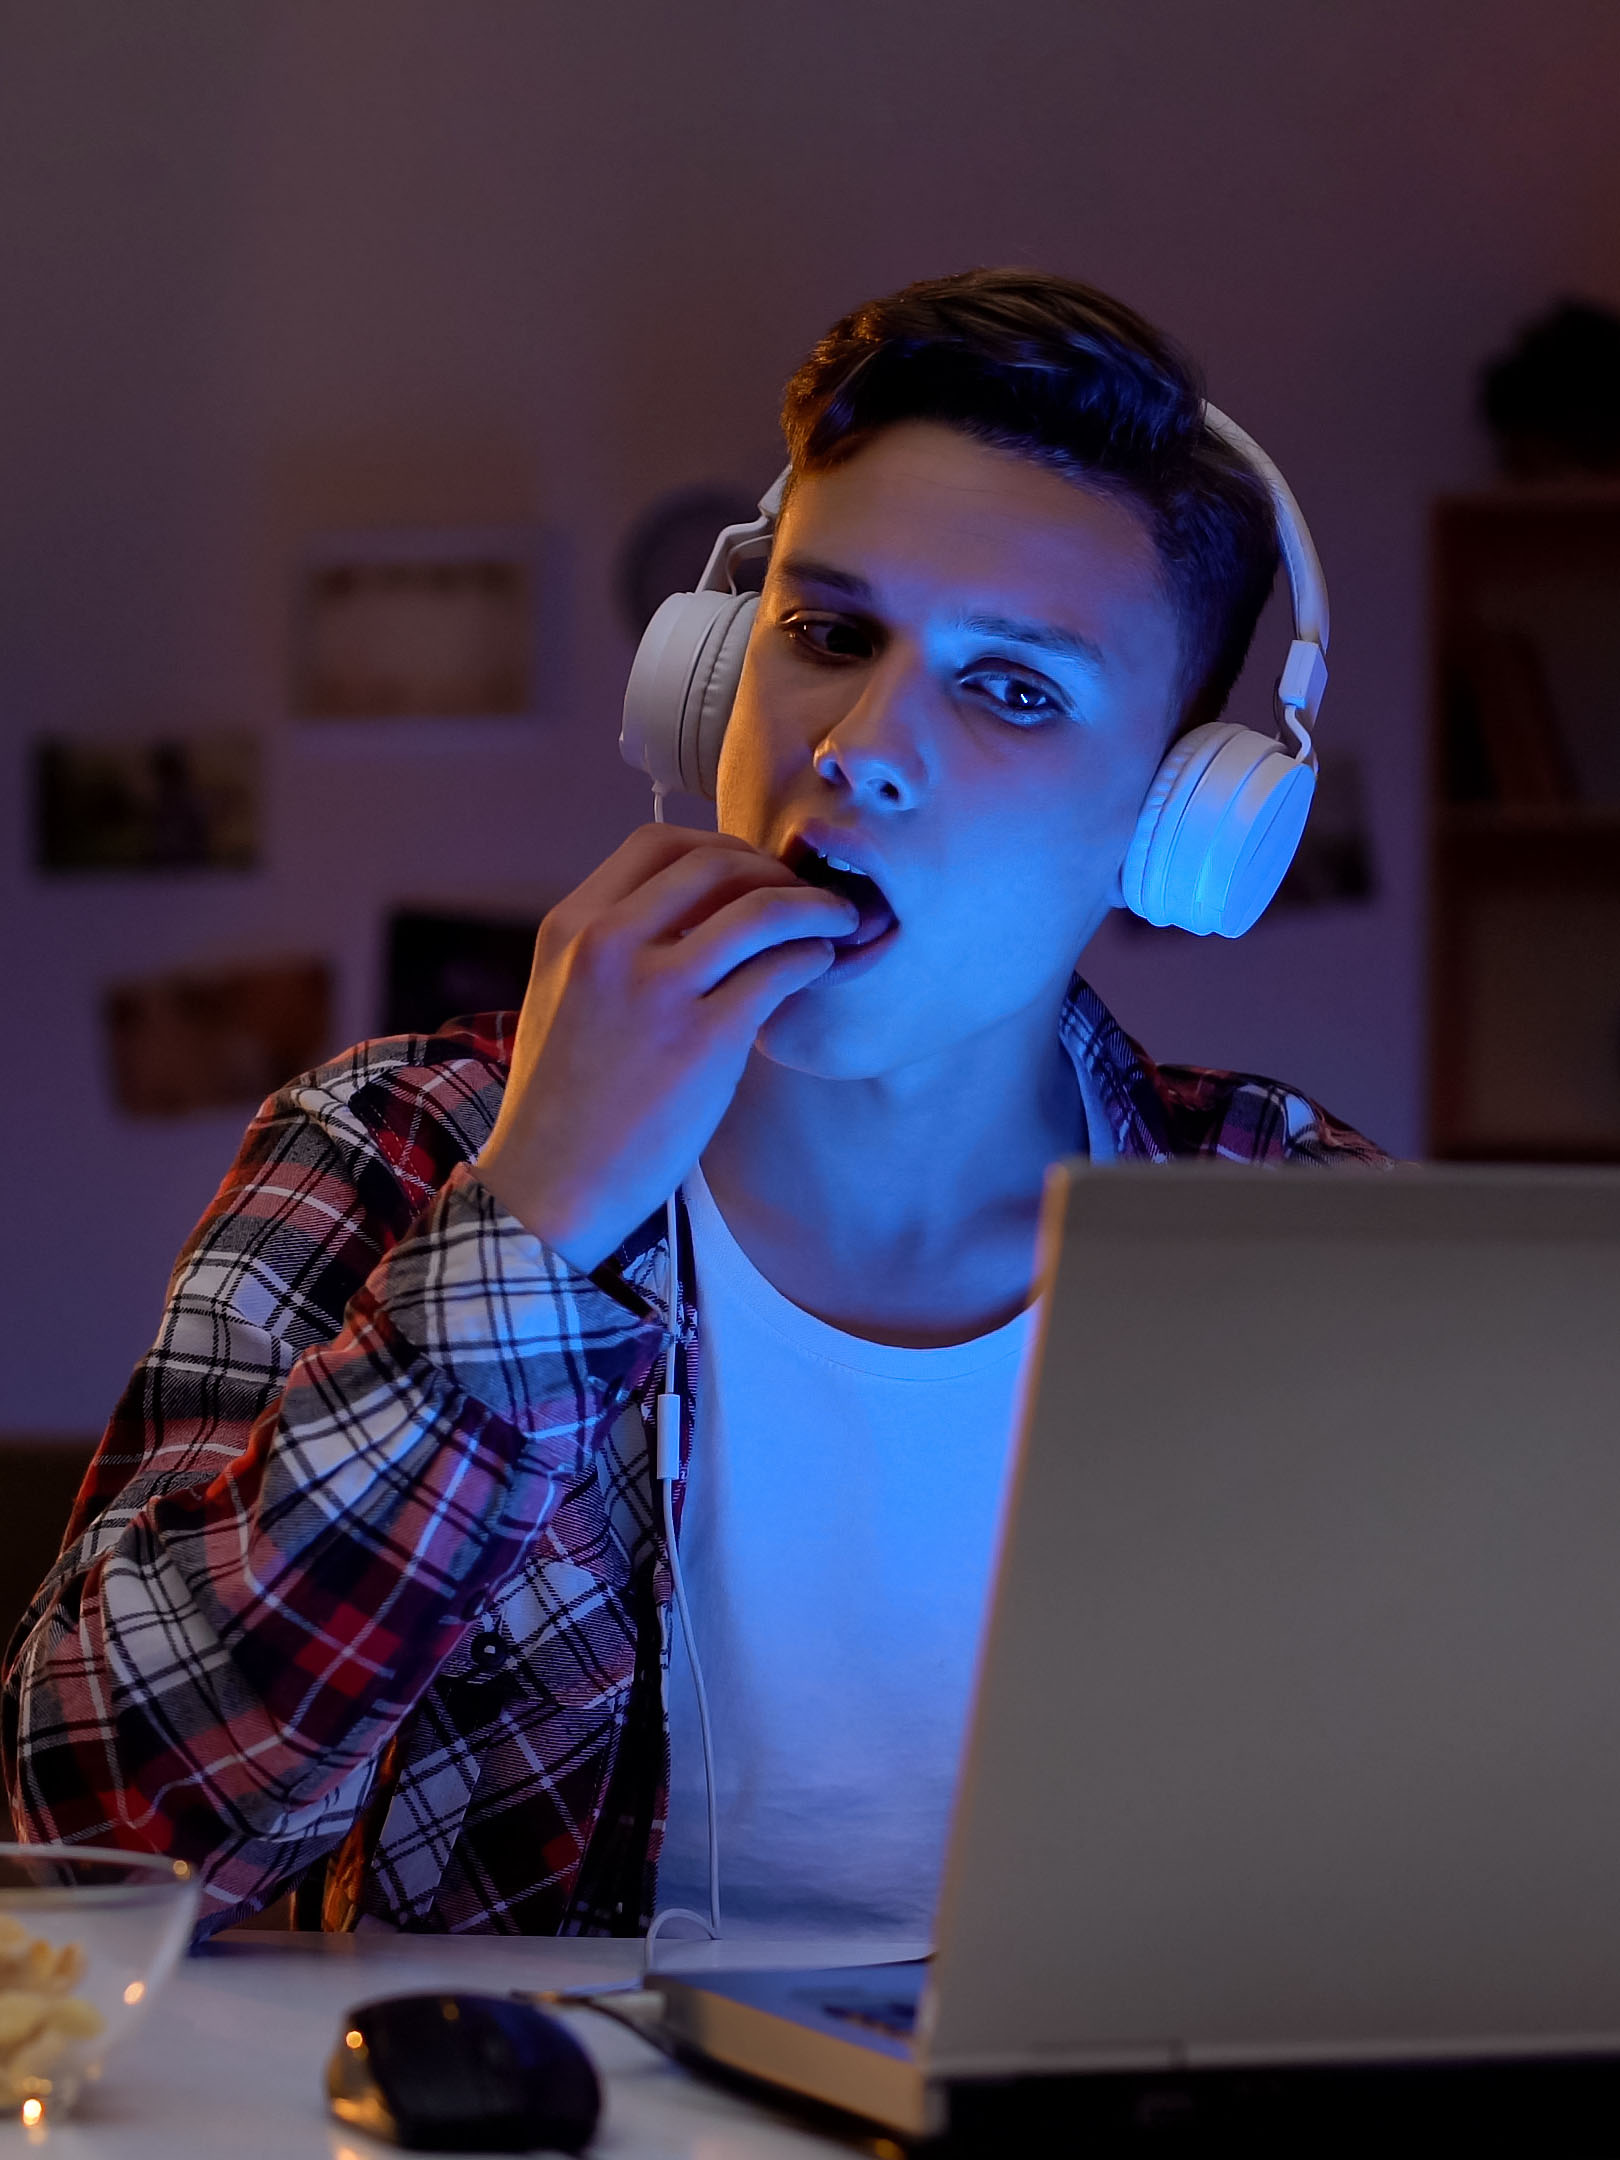 Teenage boy playing computer game and eating snack